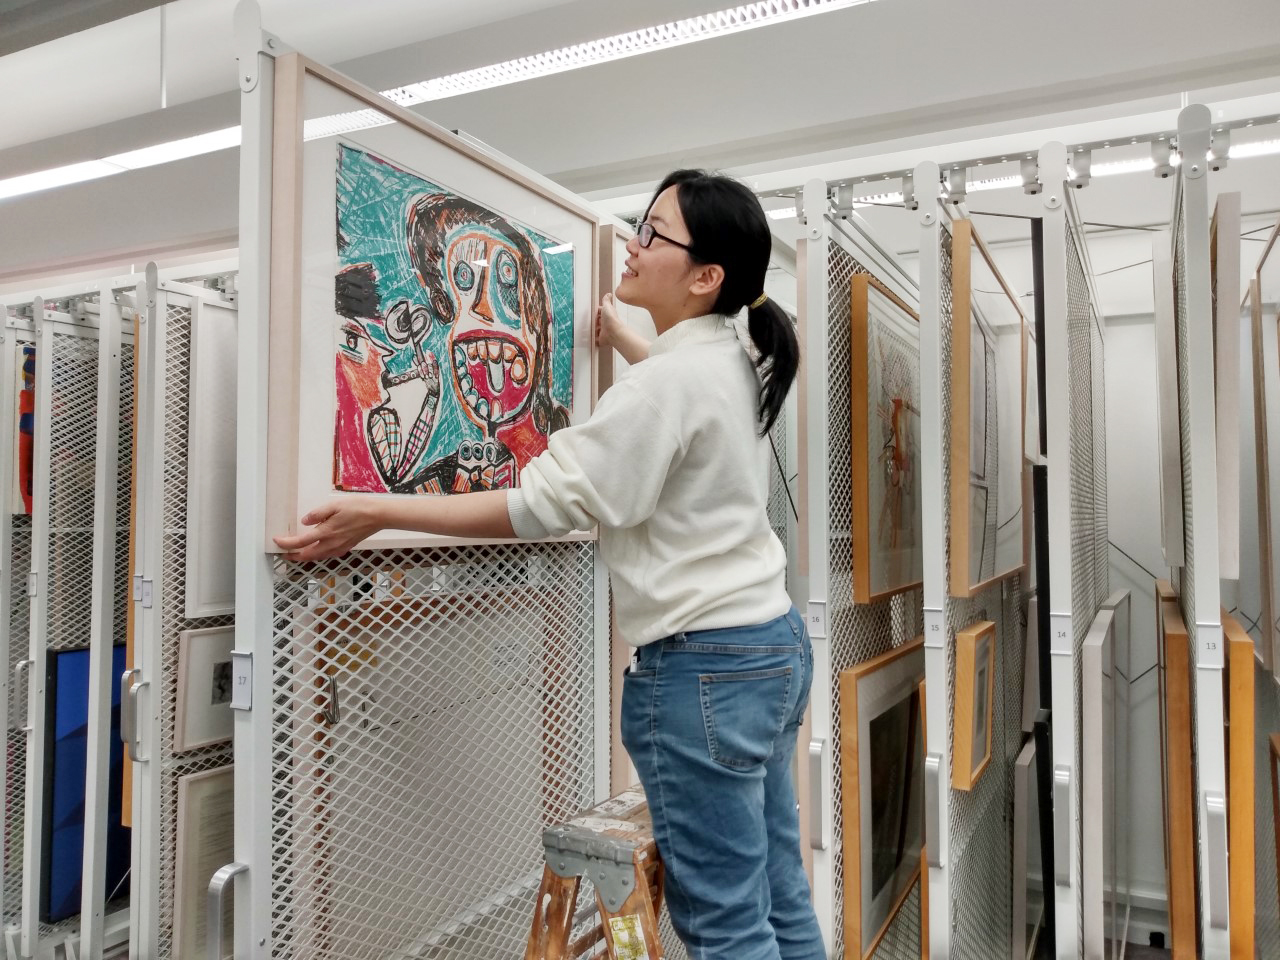 A young woman on a ladder in front of a display of artwork on sliding library walls